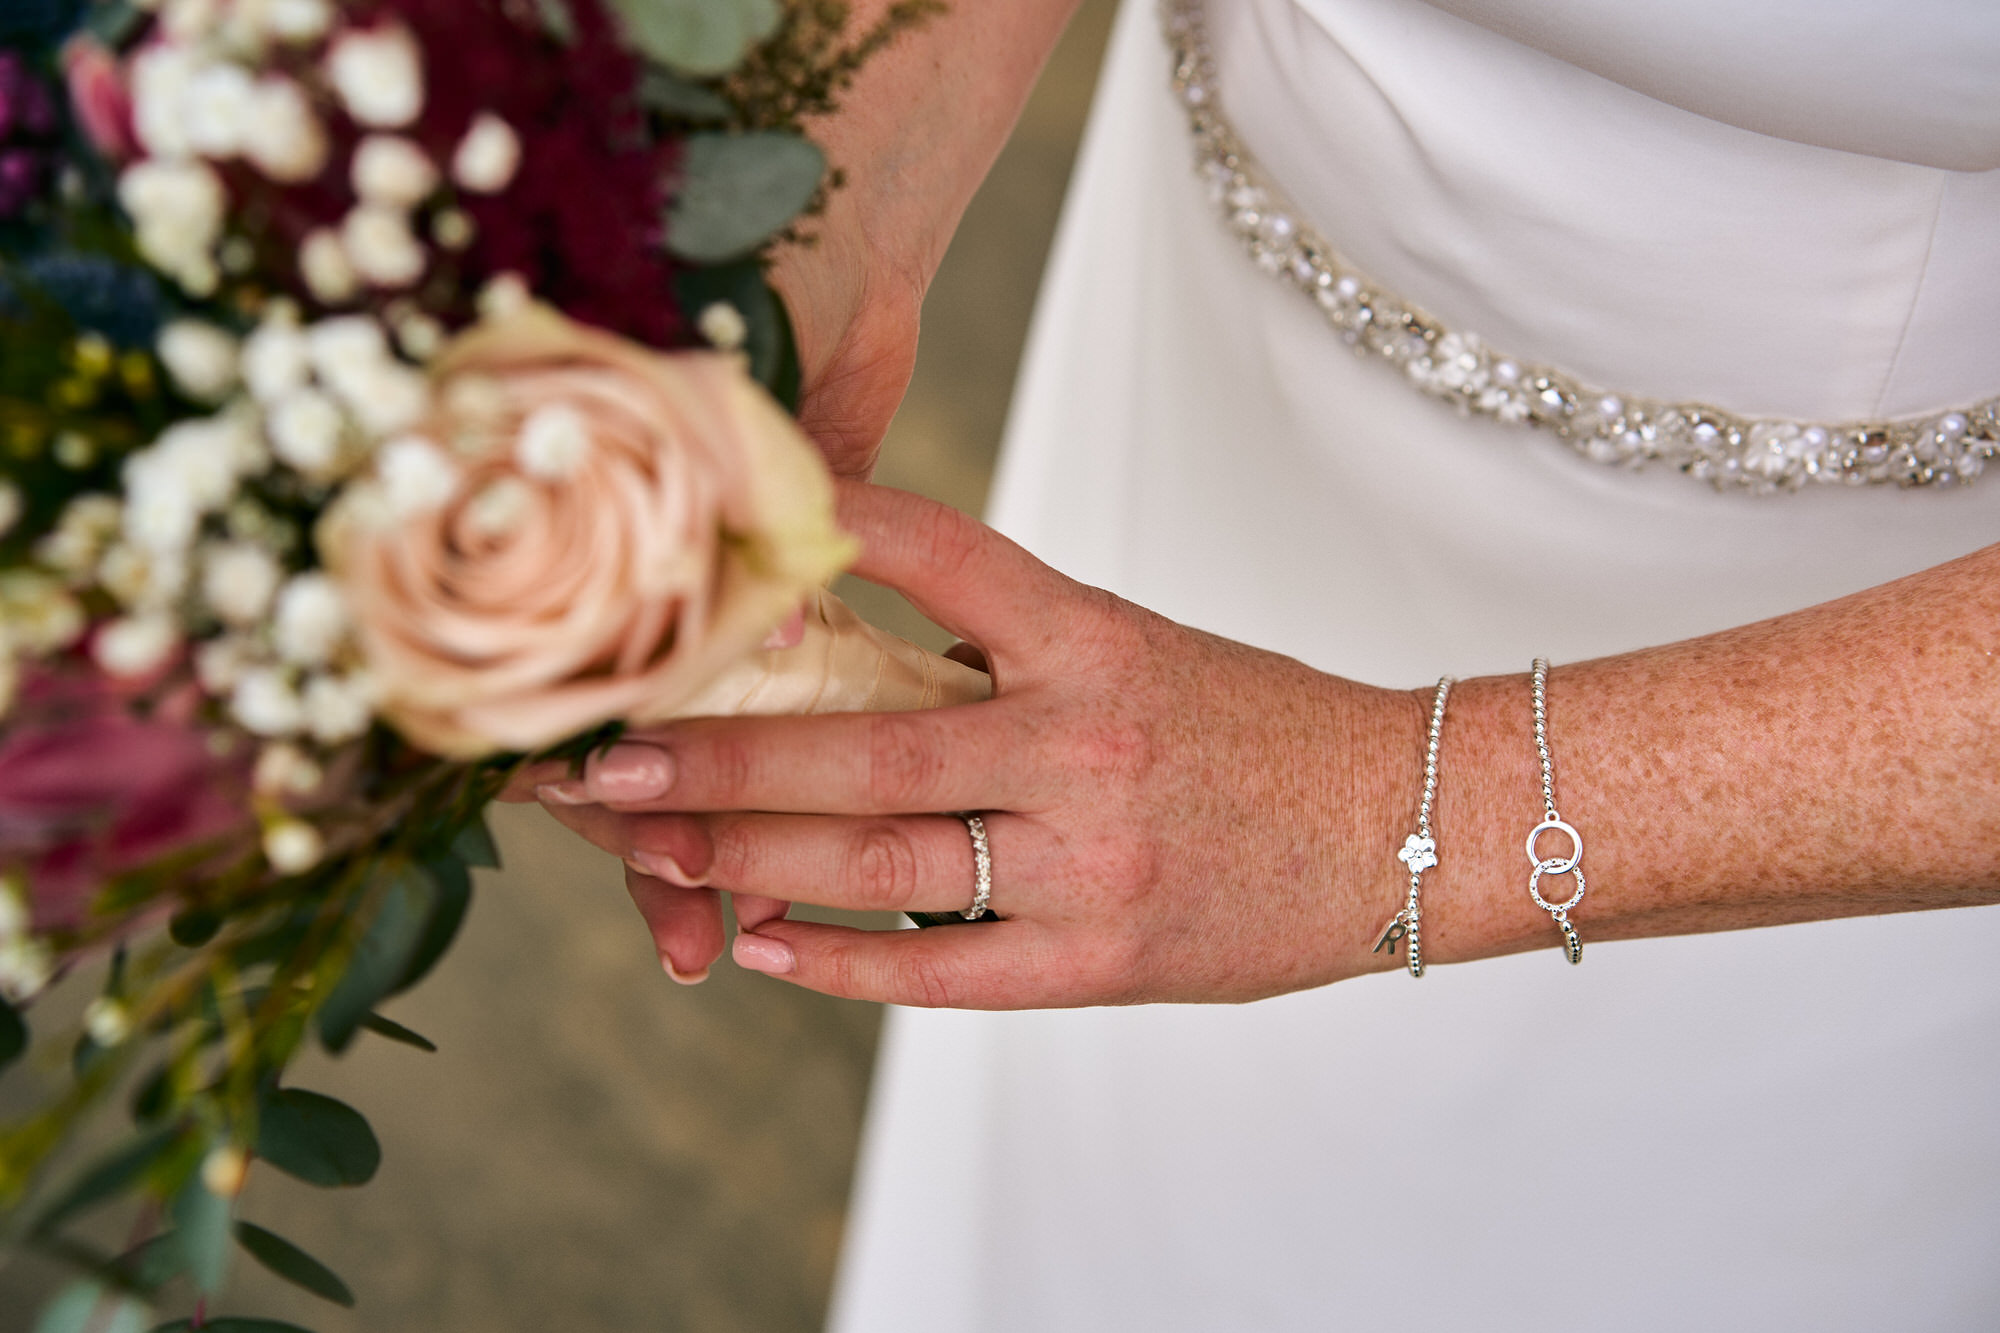 a close up photo of the brides personalised wedding bracelet